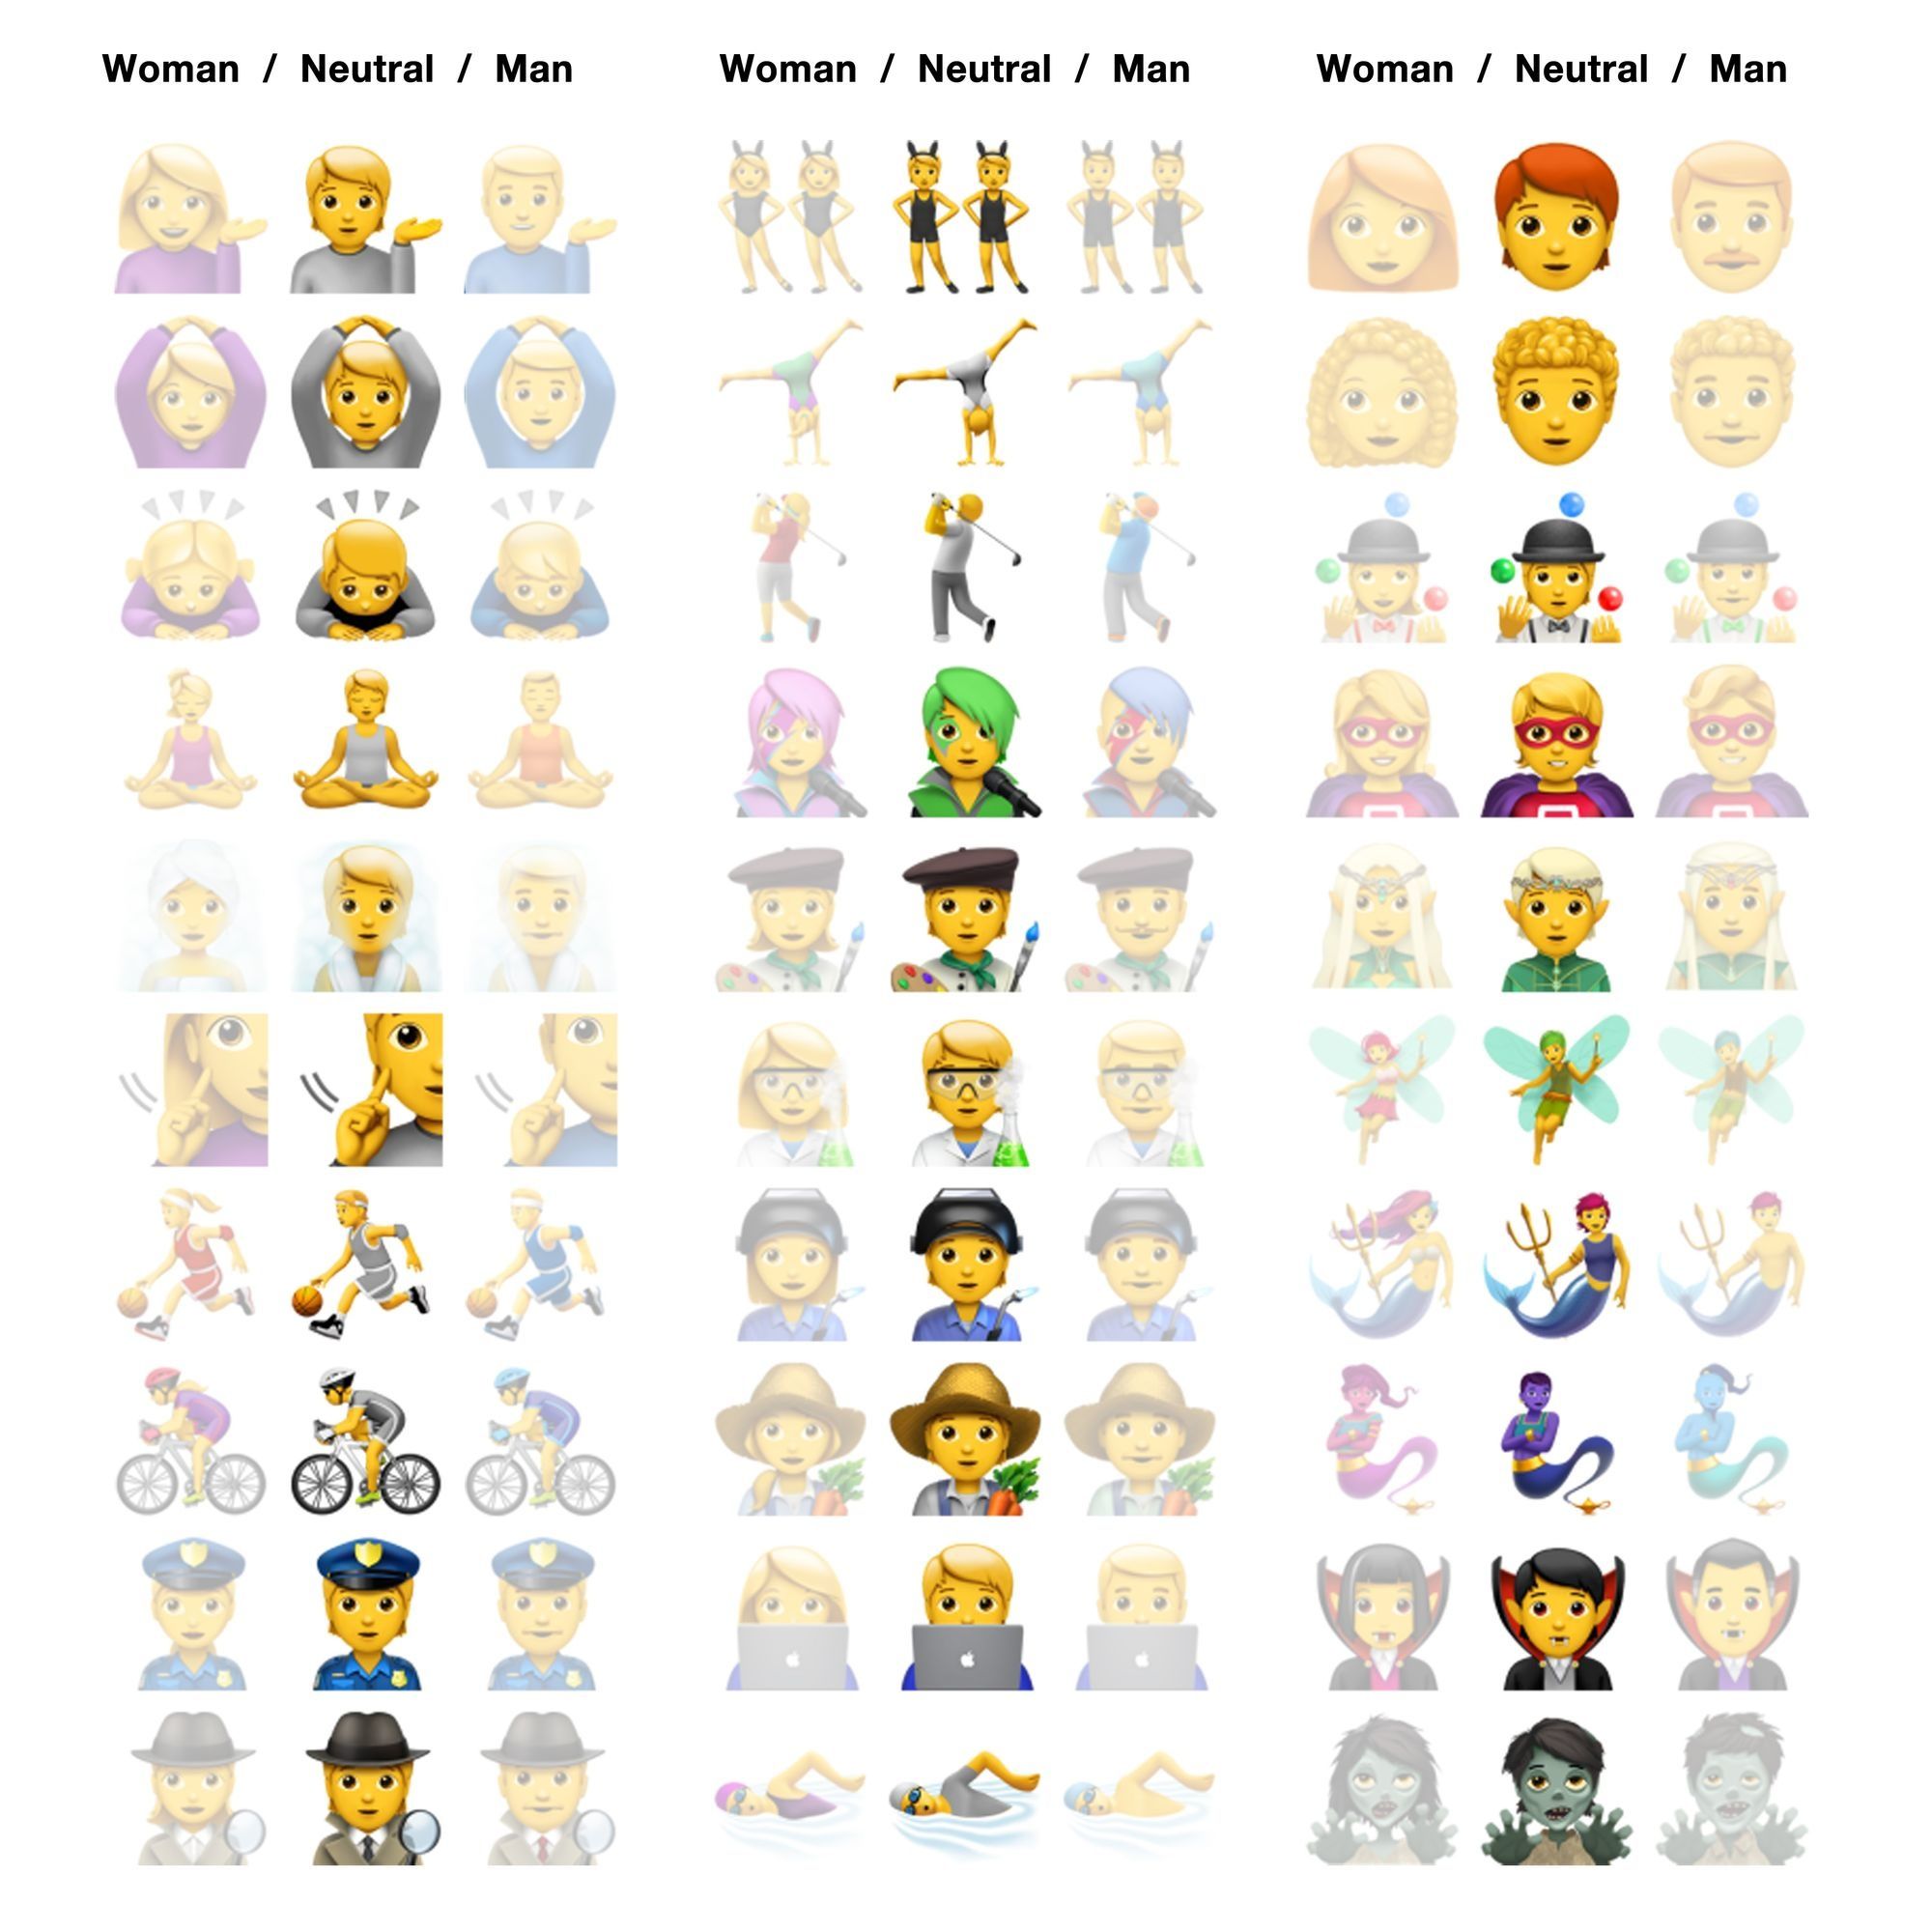 See All The New Emojis Paper